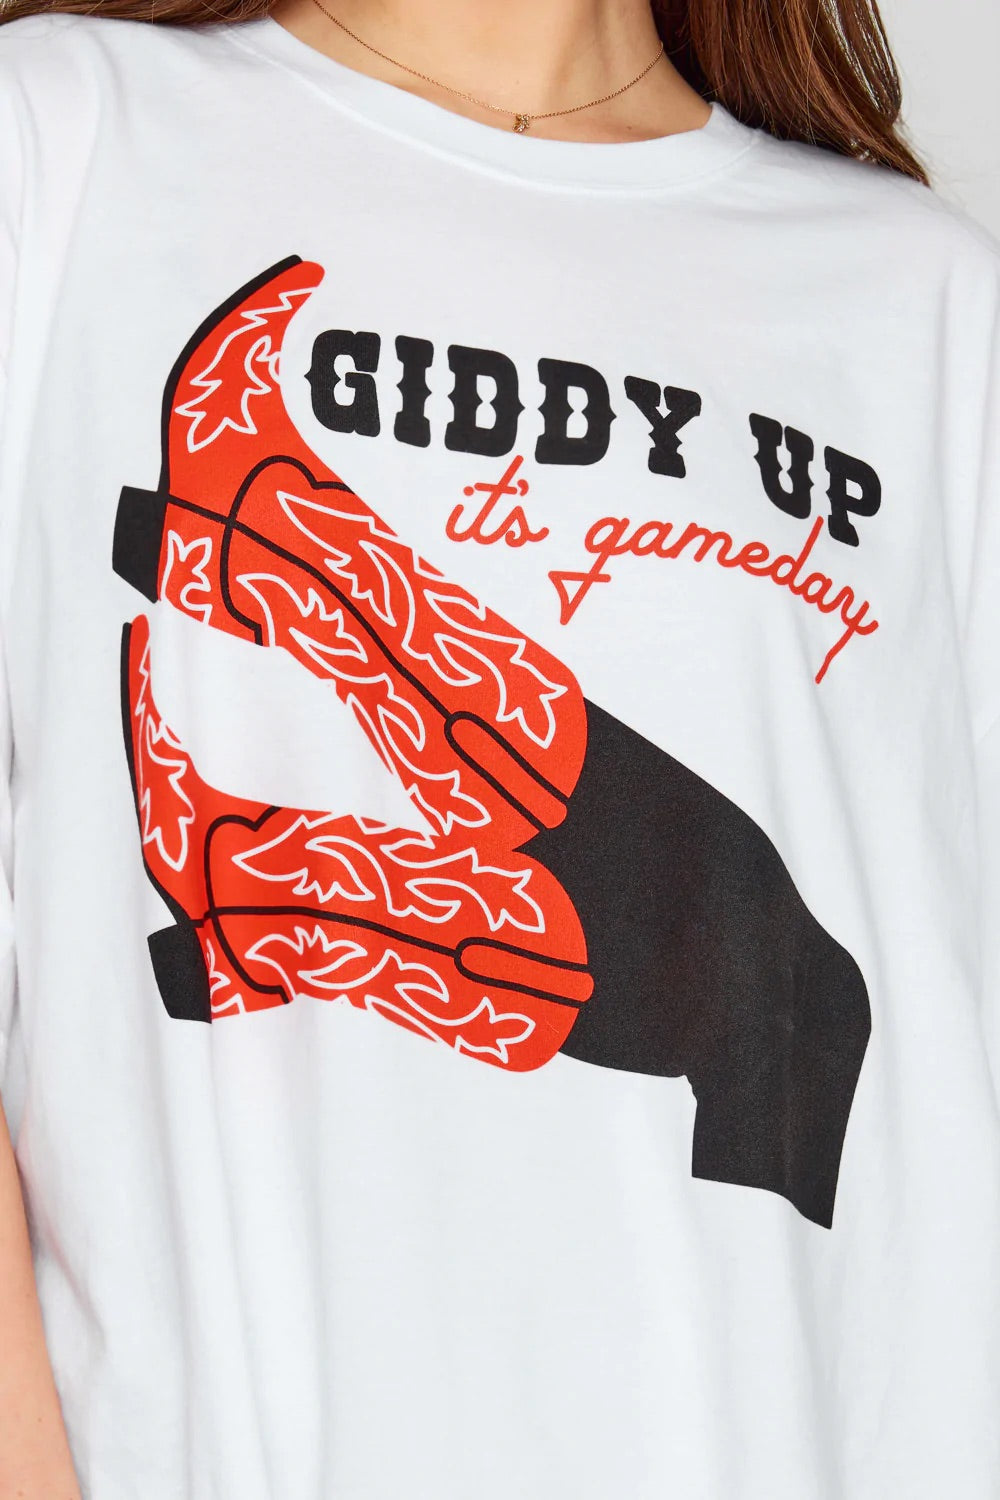 Giddy Up It's Gameday Tee